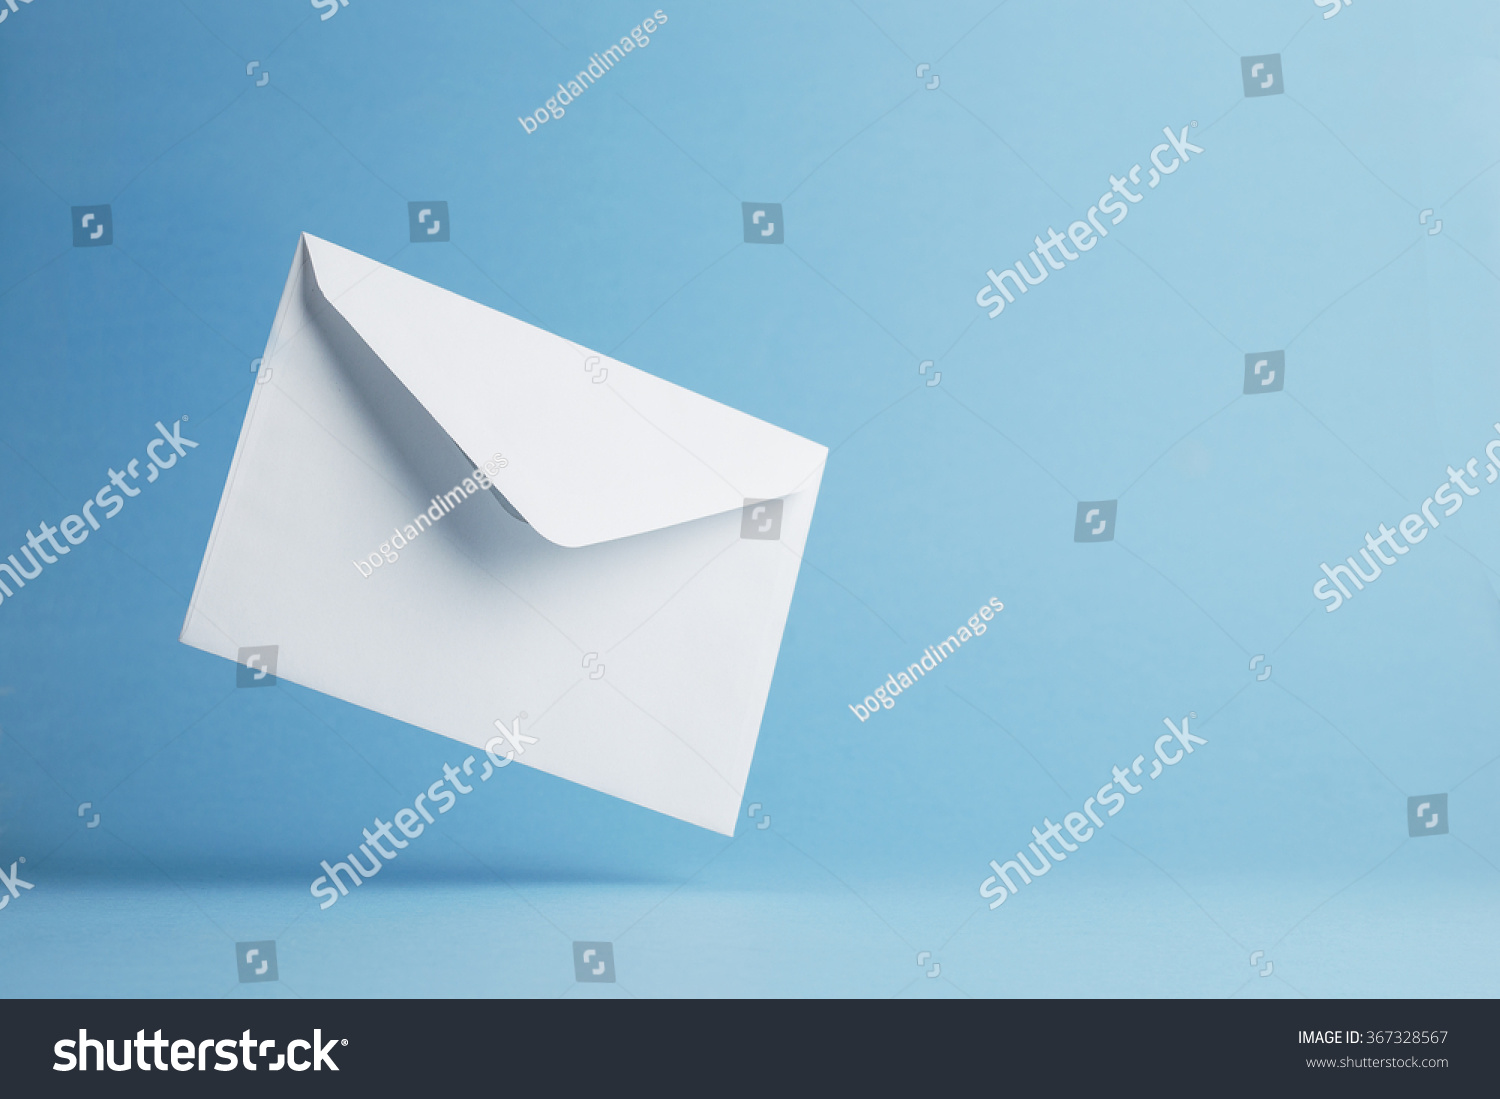 Envelope falling on the ground, blue background with negative space #367328567